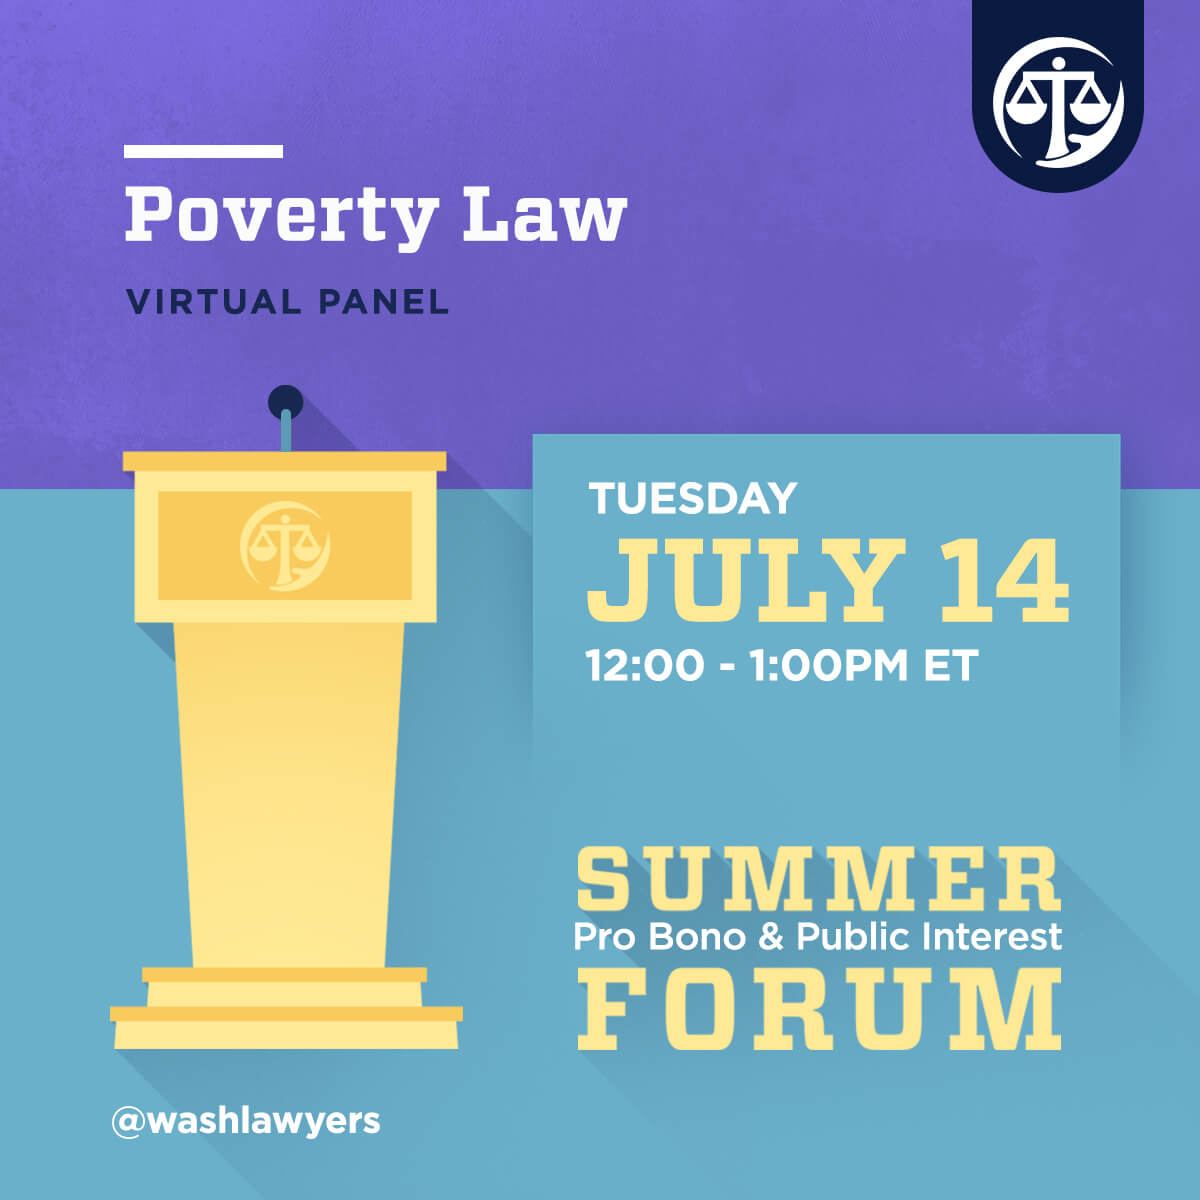 Graphic: Poverty Law event panel